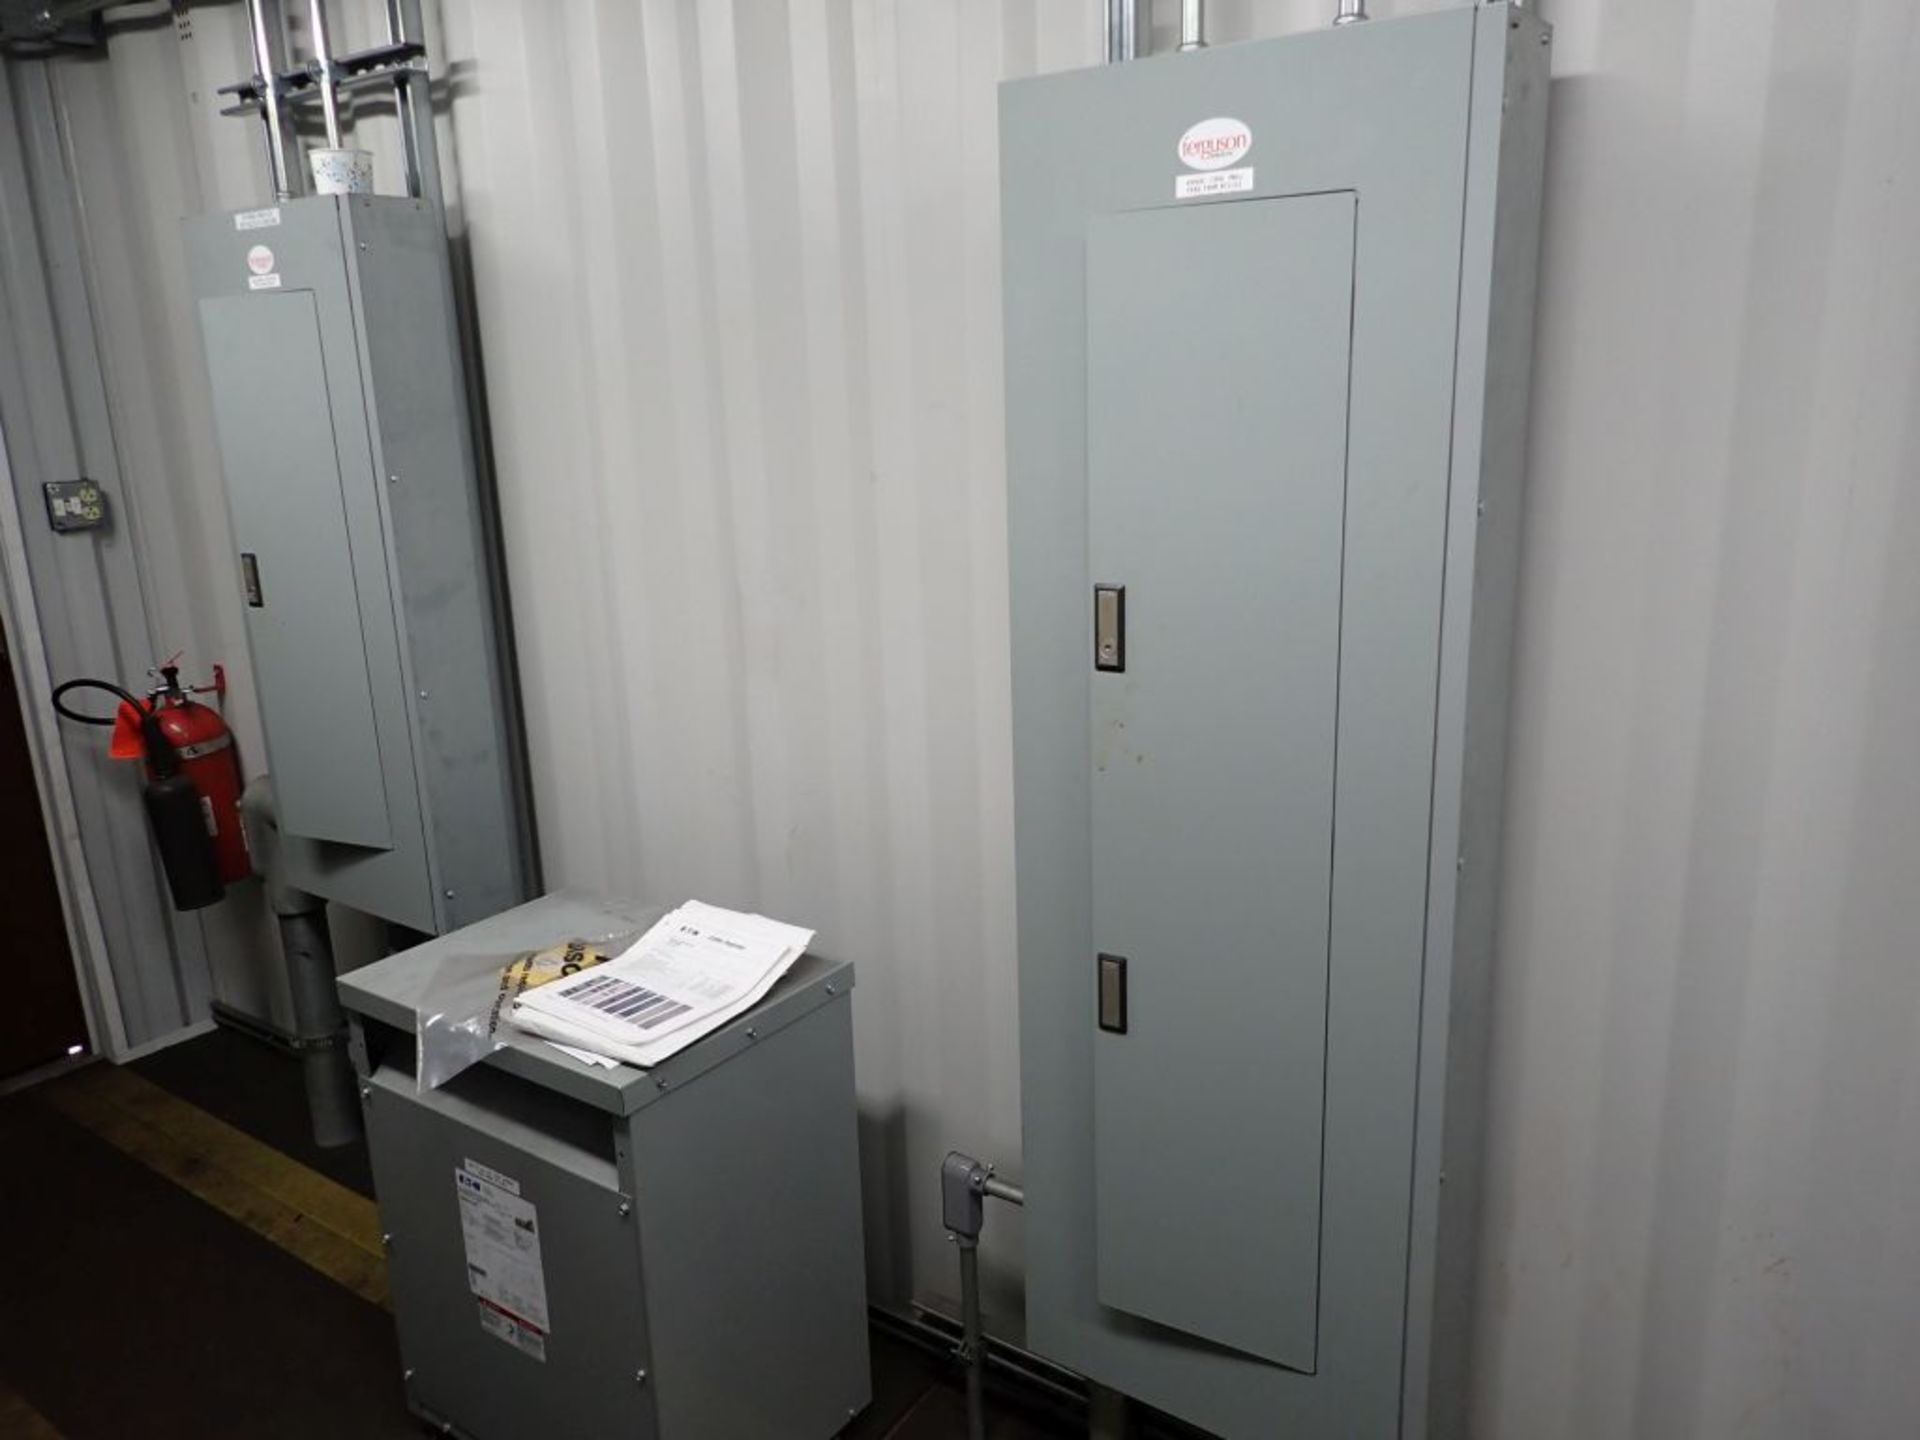 MCC Room with Switchgear and Drives in Container - Image 9 of 166